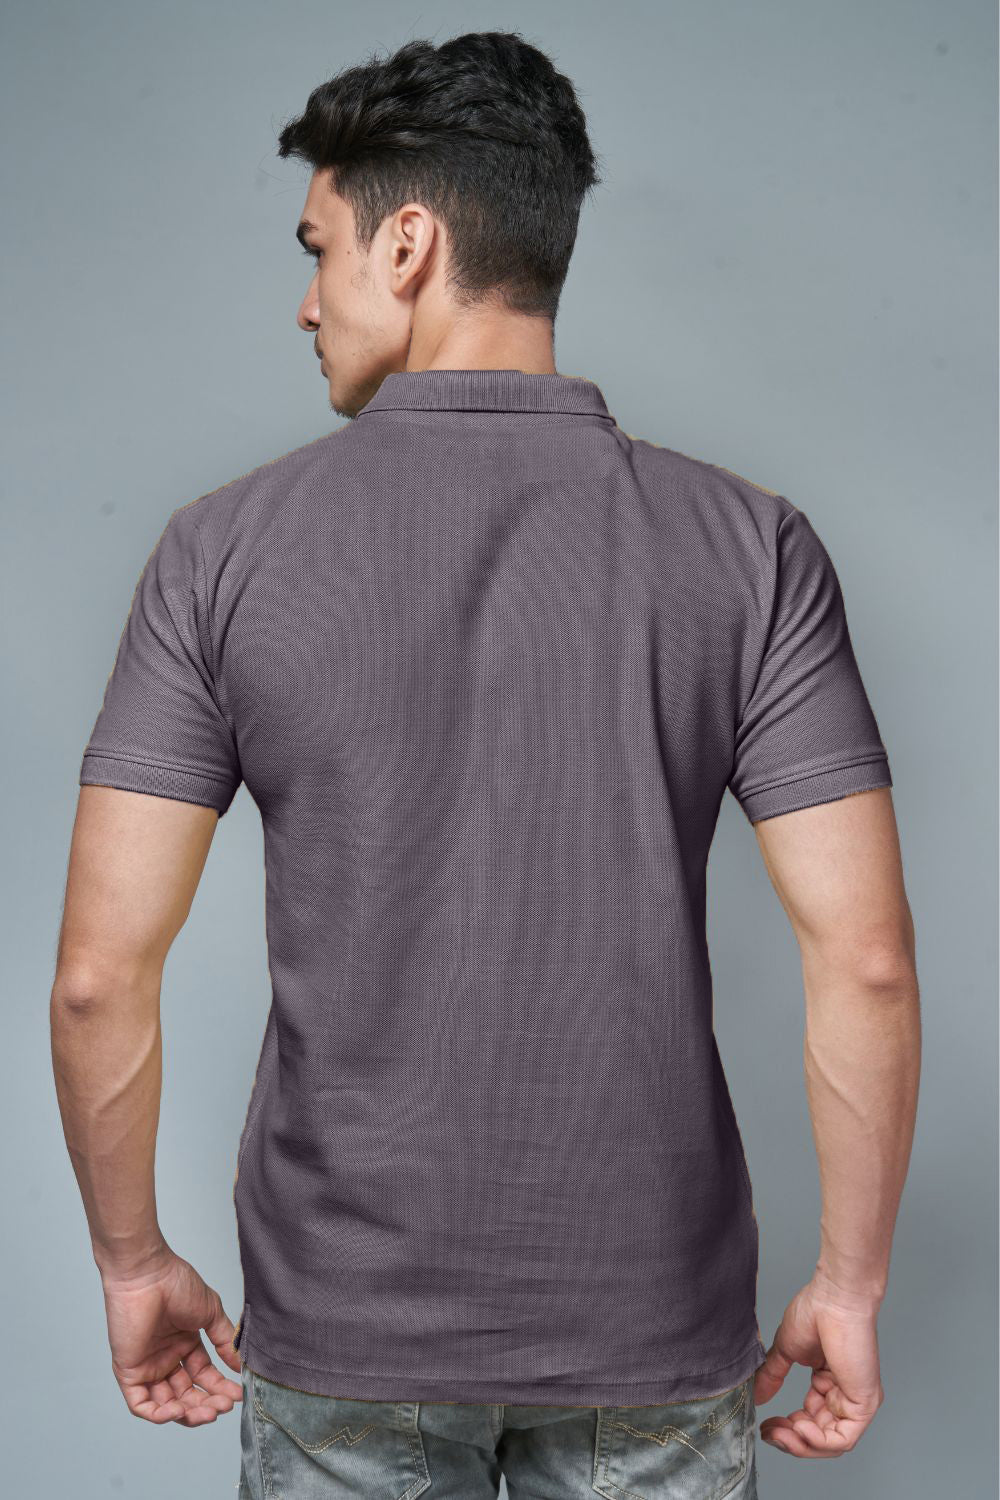 Grape colored, identity Polo T-shirts for men with collar and half sleeves, back view.